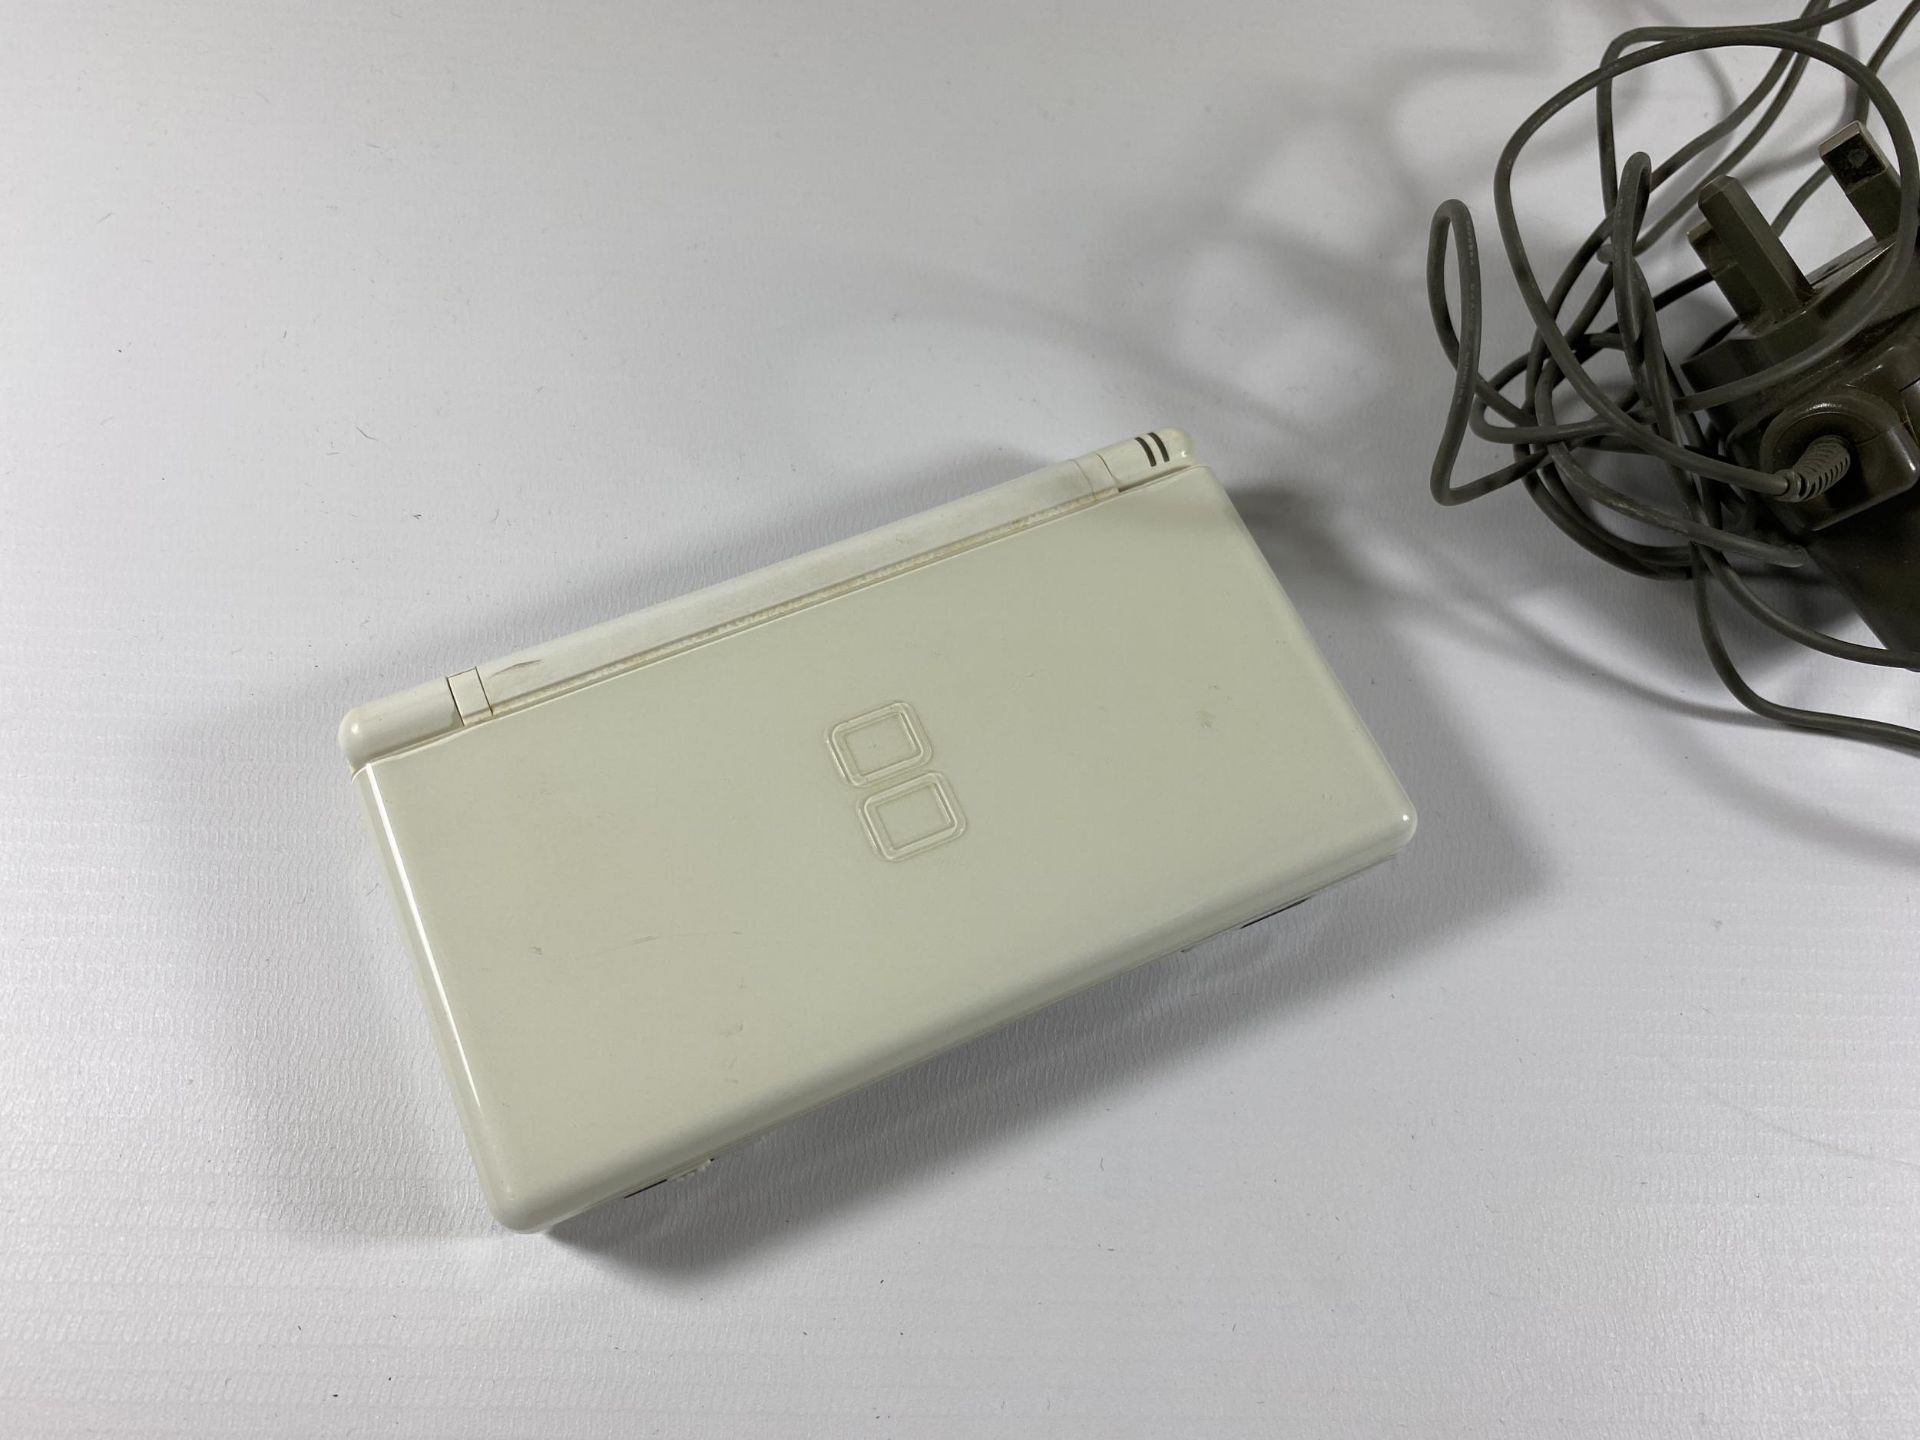 A WHITE NINTENDO DS CONSOLE & CHARGER - Image 2 of 3